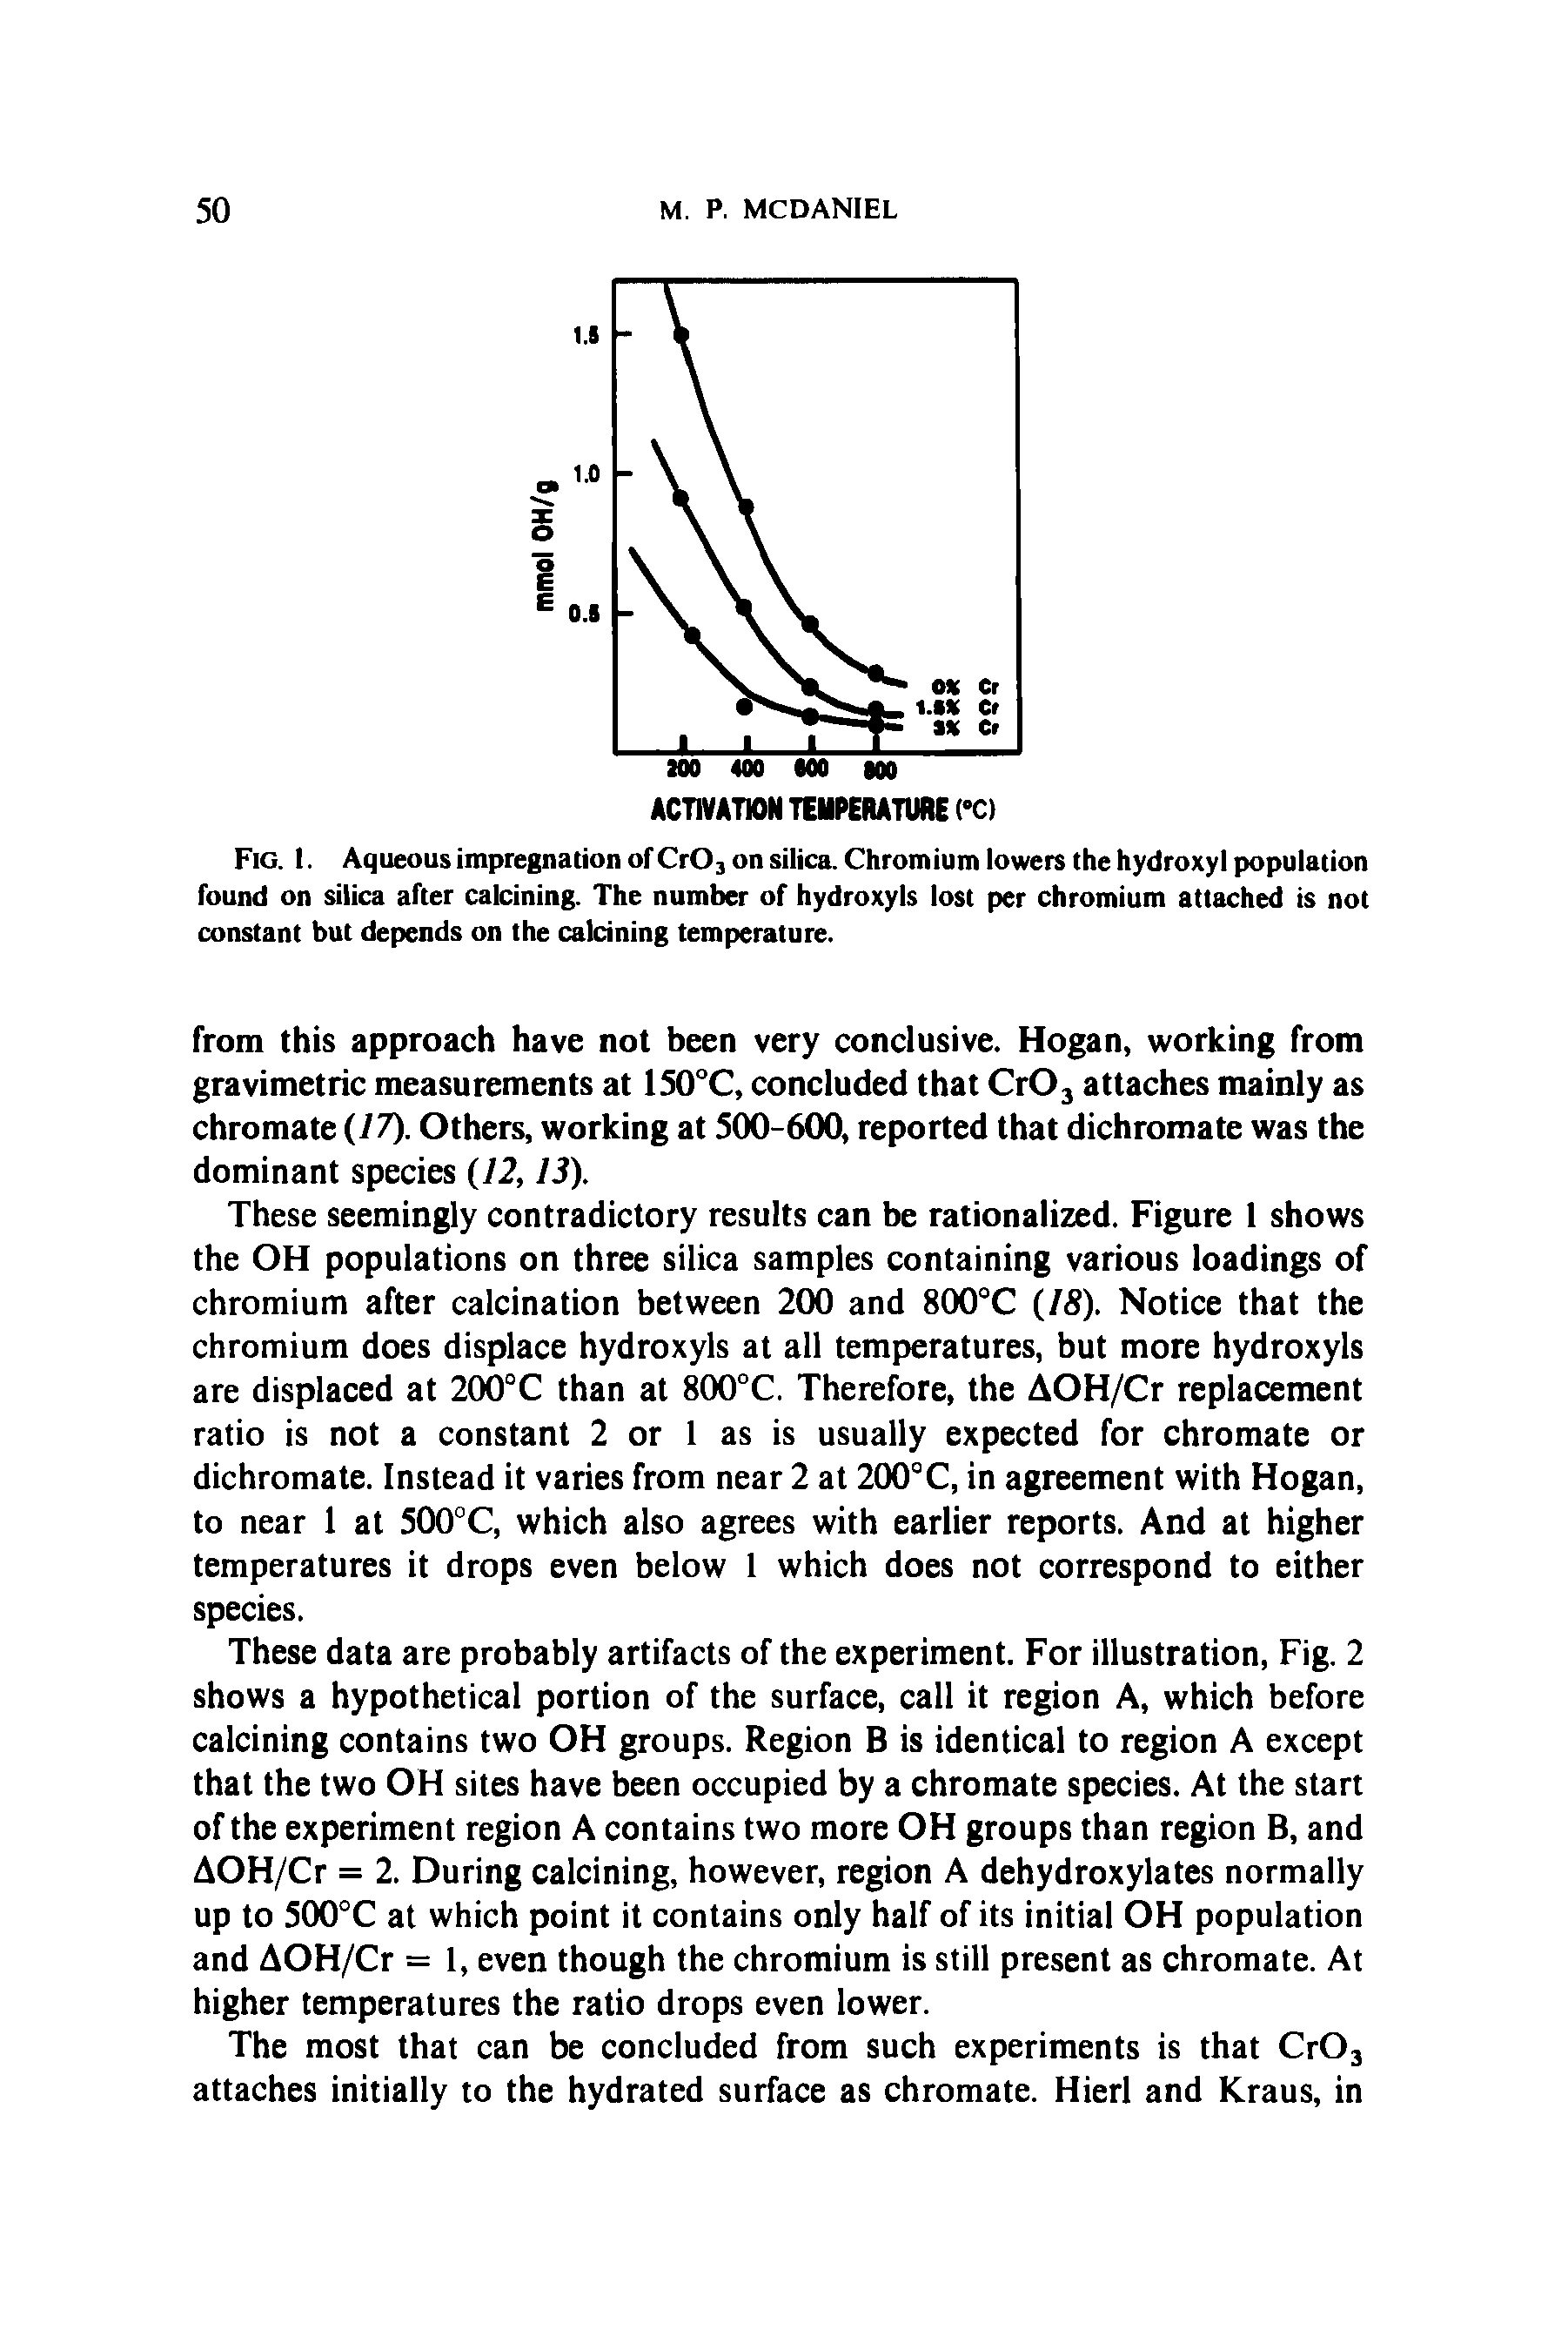 Fig. I. Aqueous impregnation of Cr03 on silica. Chromium lowers the hydroxyl population found on silica after calcining. The number of hydroxyls lost per chromium attached is not constant but depends on the calcining temperature.